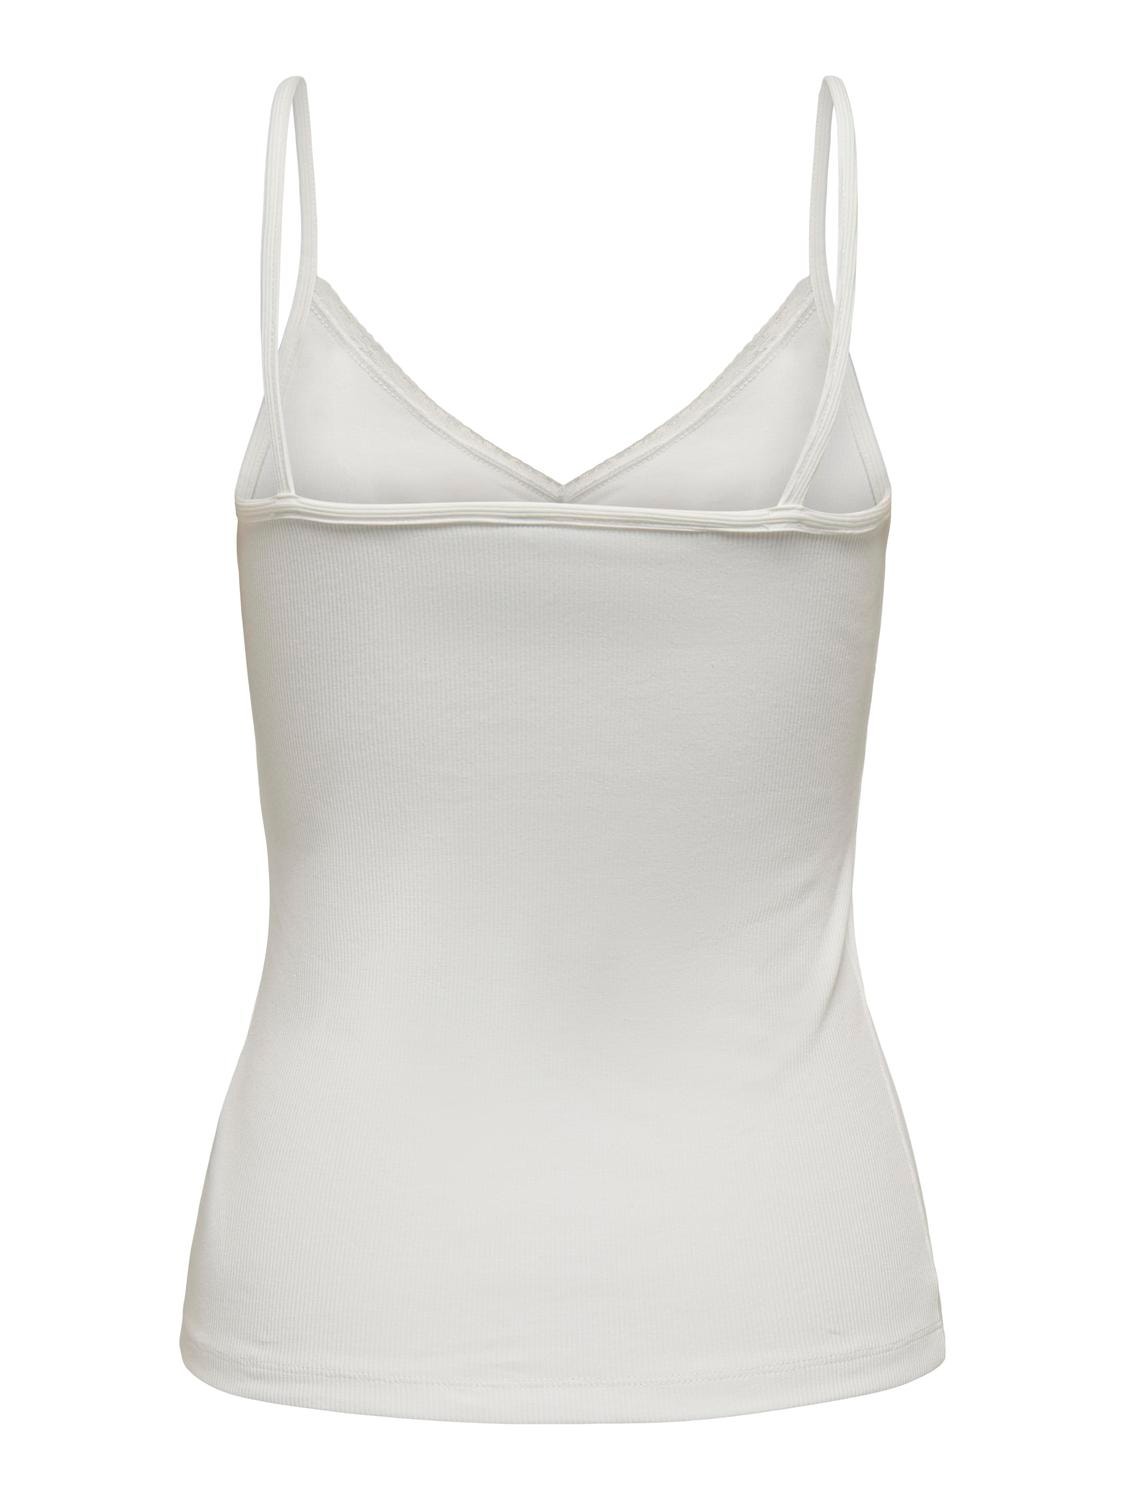 ONLY Singlet Top With Lace Edge -Cloud Dancer - 15289730